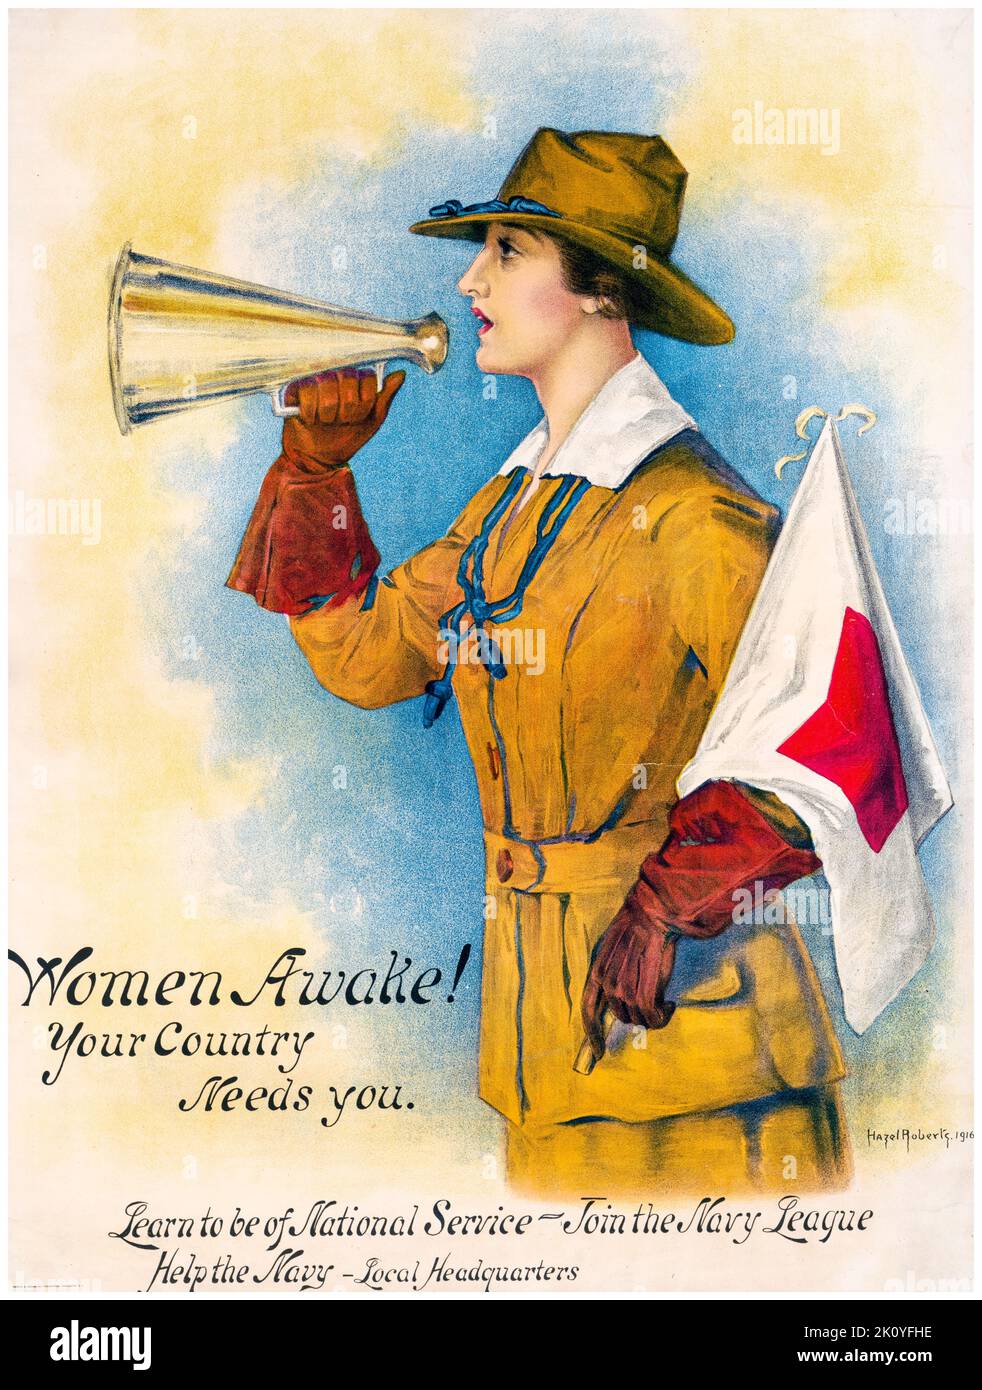 American, US, WW1, Female recruitment poster, Women awake!: Your country needs you, join the Navy League, by Hazel Roberts, 1916 Stock Photo